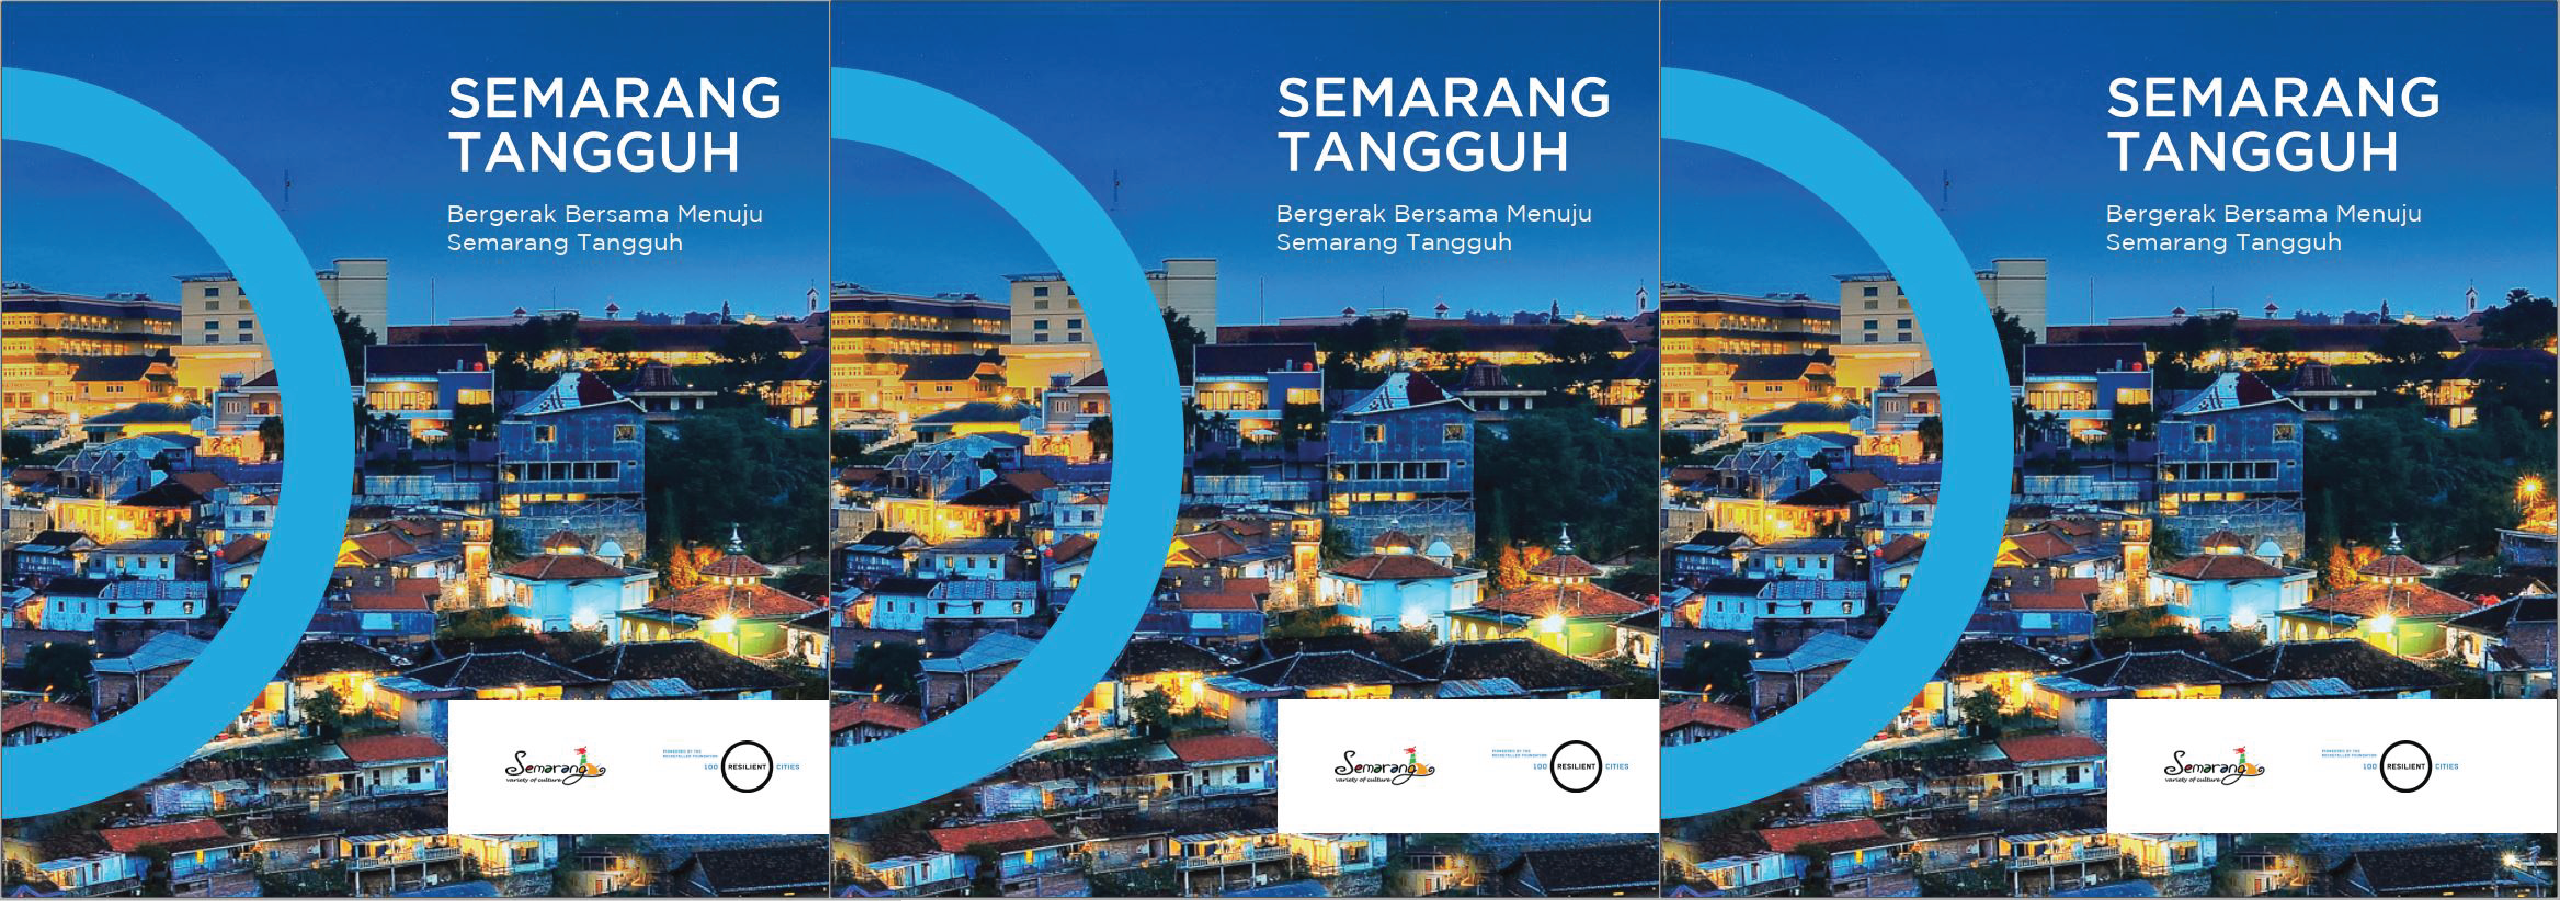 Semarang City Launches The Resilience Strategy, “Moving Together Toward The Resilient Of Semarang”